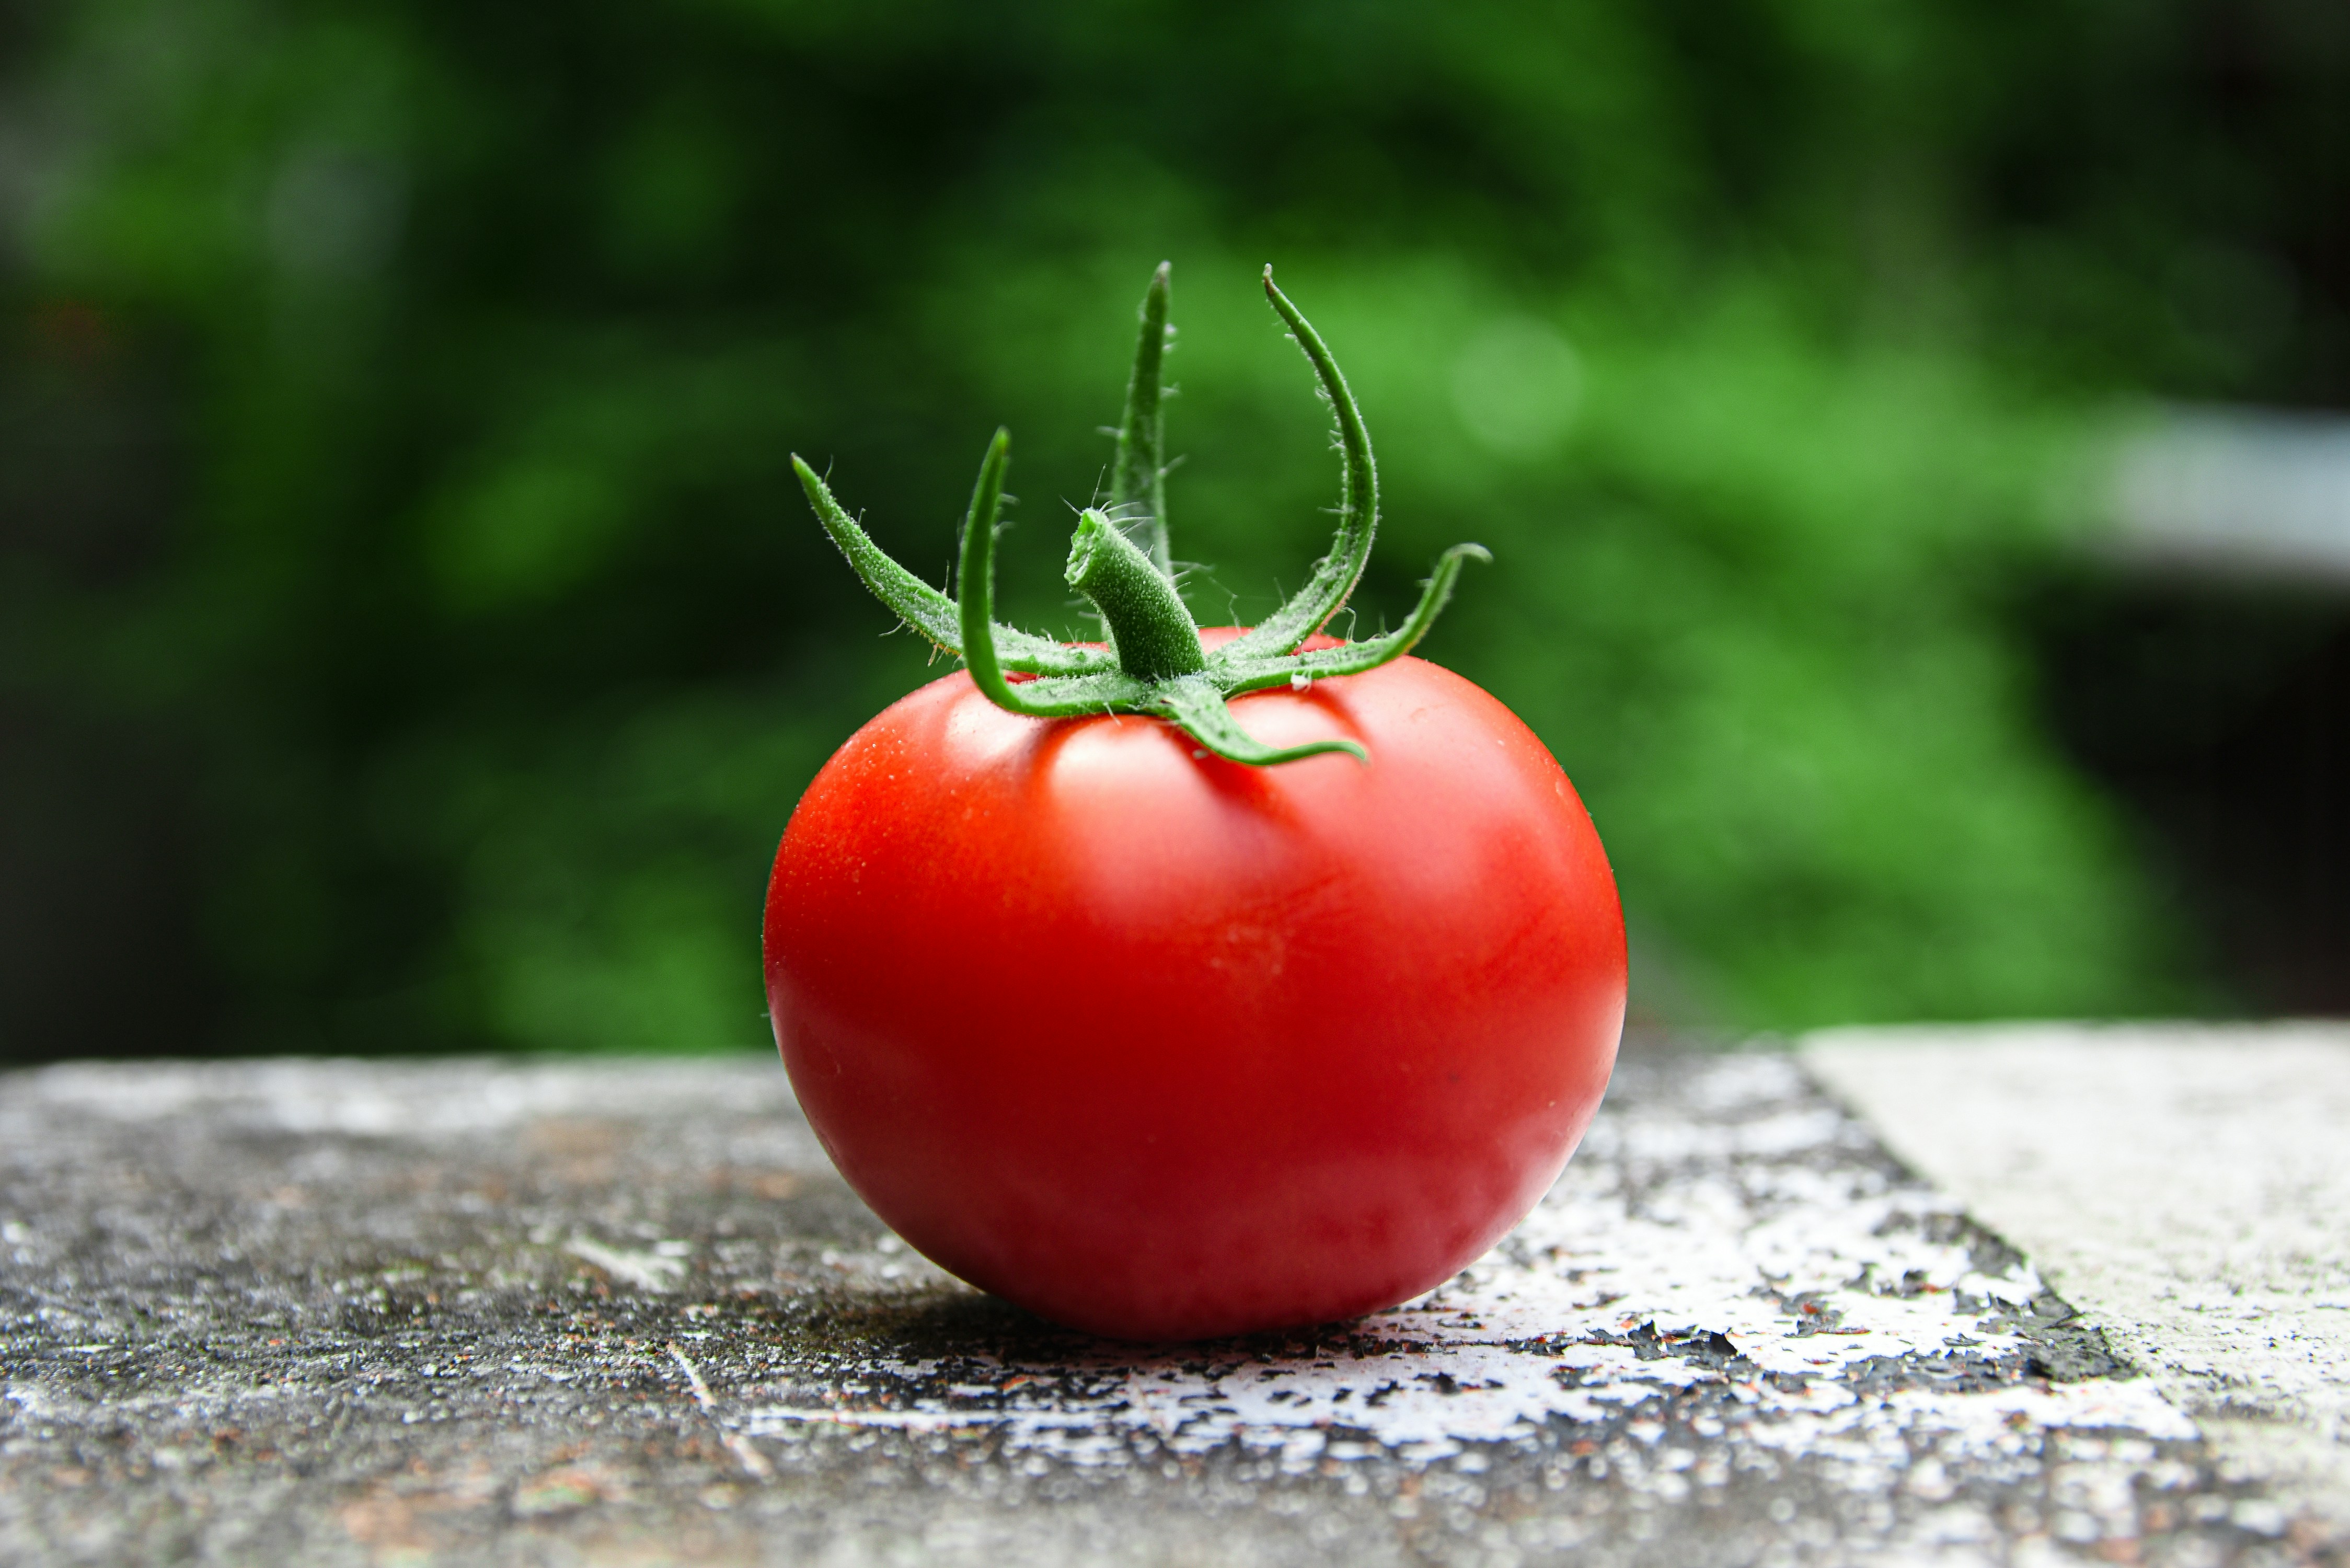 Locally grown tomatoes can have a higher environmental impact if grown in heated greenhouses. : Unsplash: Avin CP Unsplash Licence